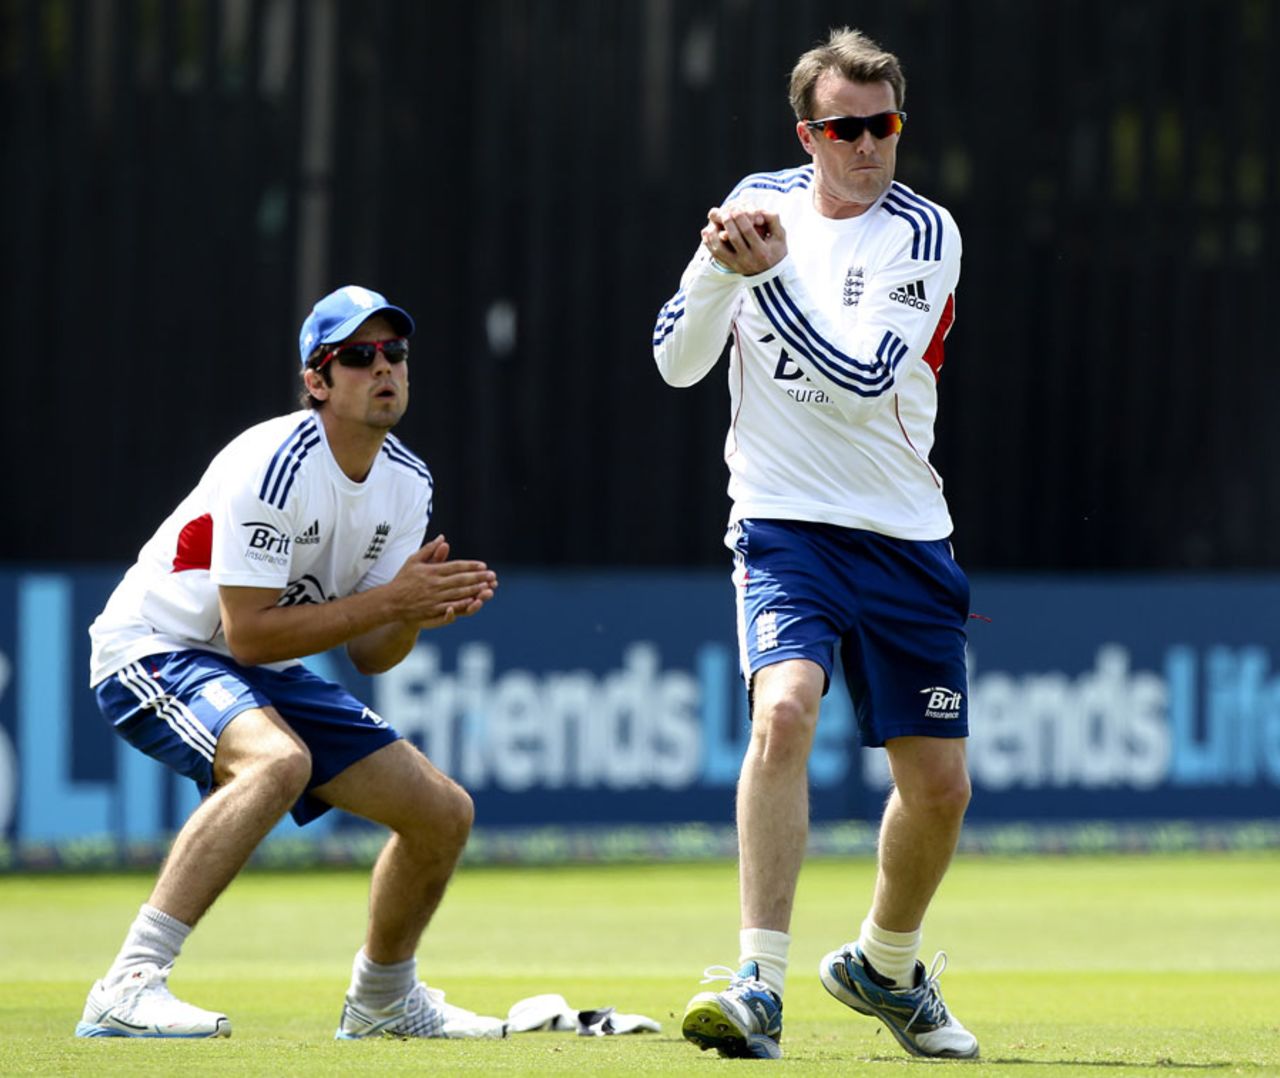 Graeme Swann takes a catch in practise as Alastair Cook looks on, Chelmsford, June, 29, 2013